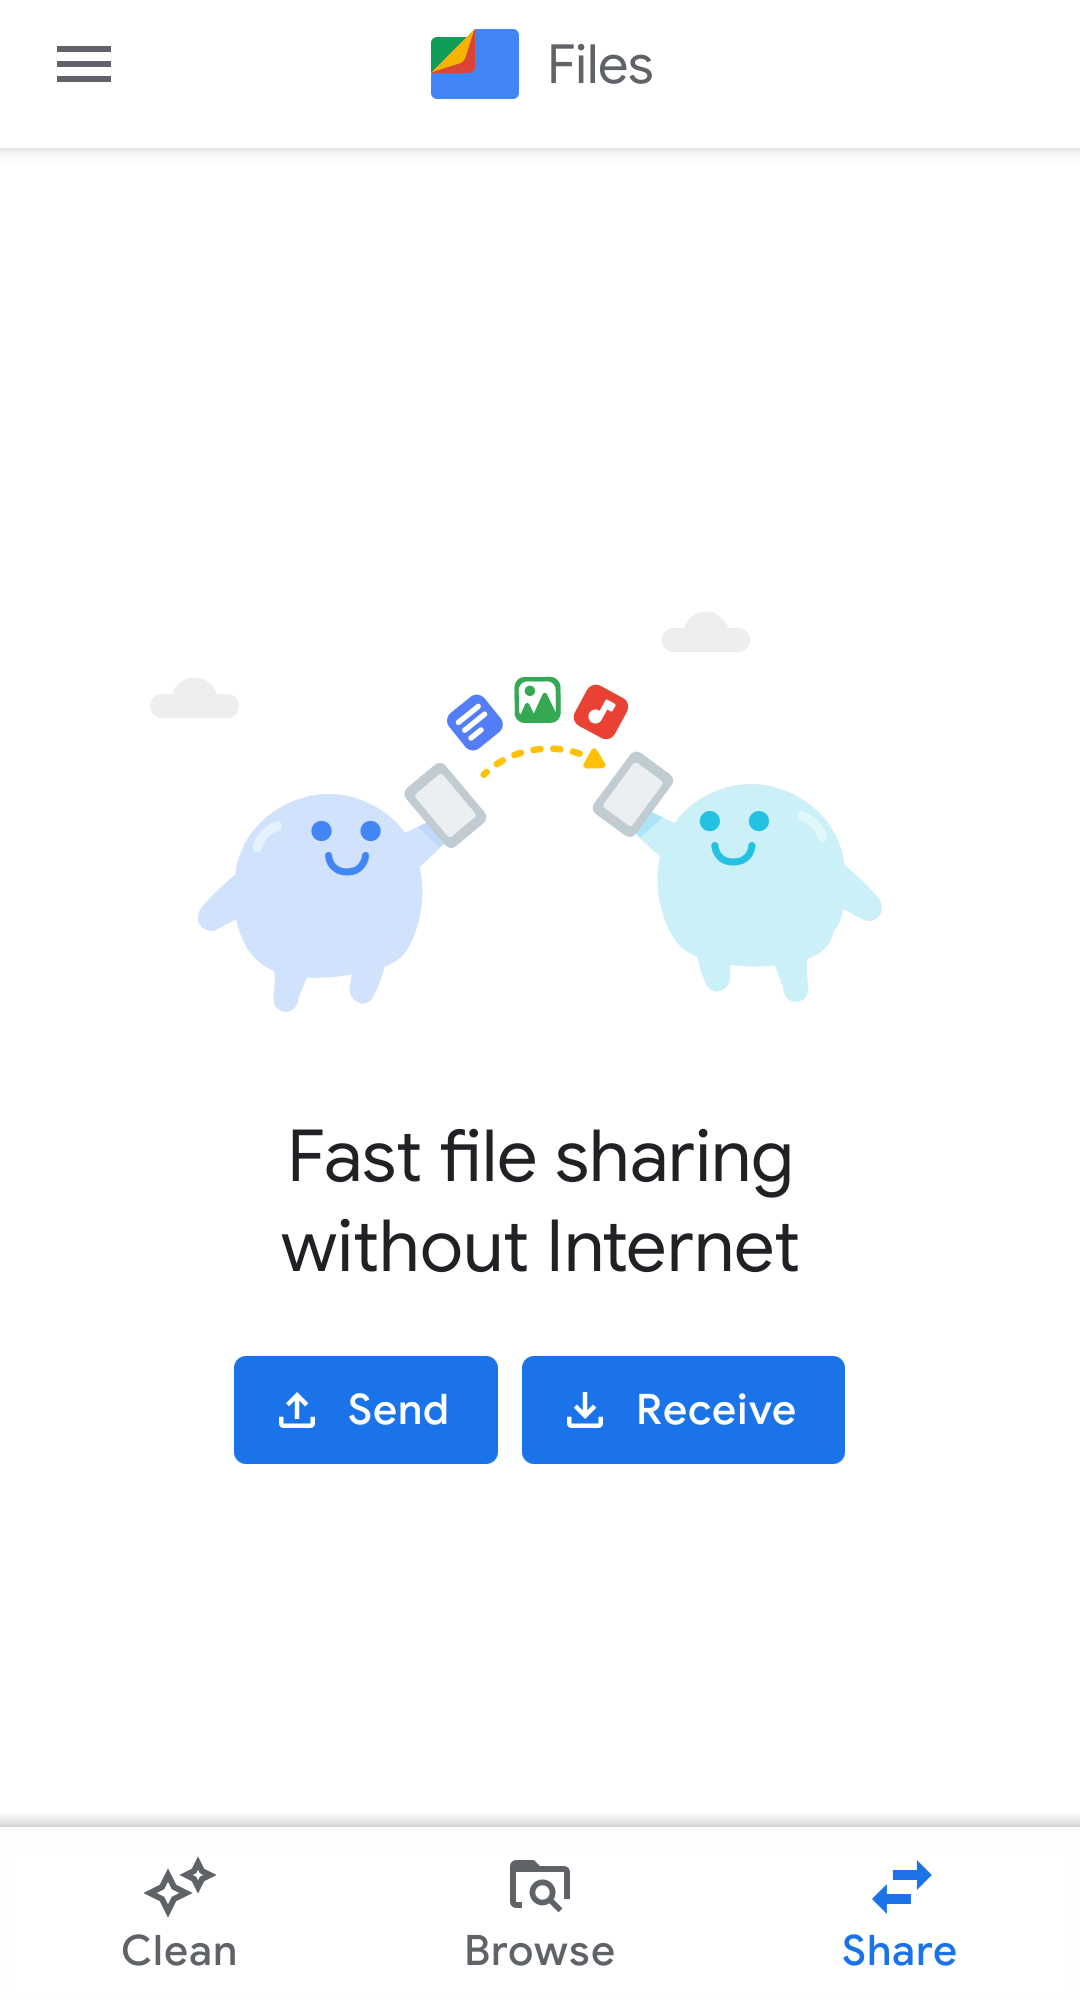 Files by Google Share